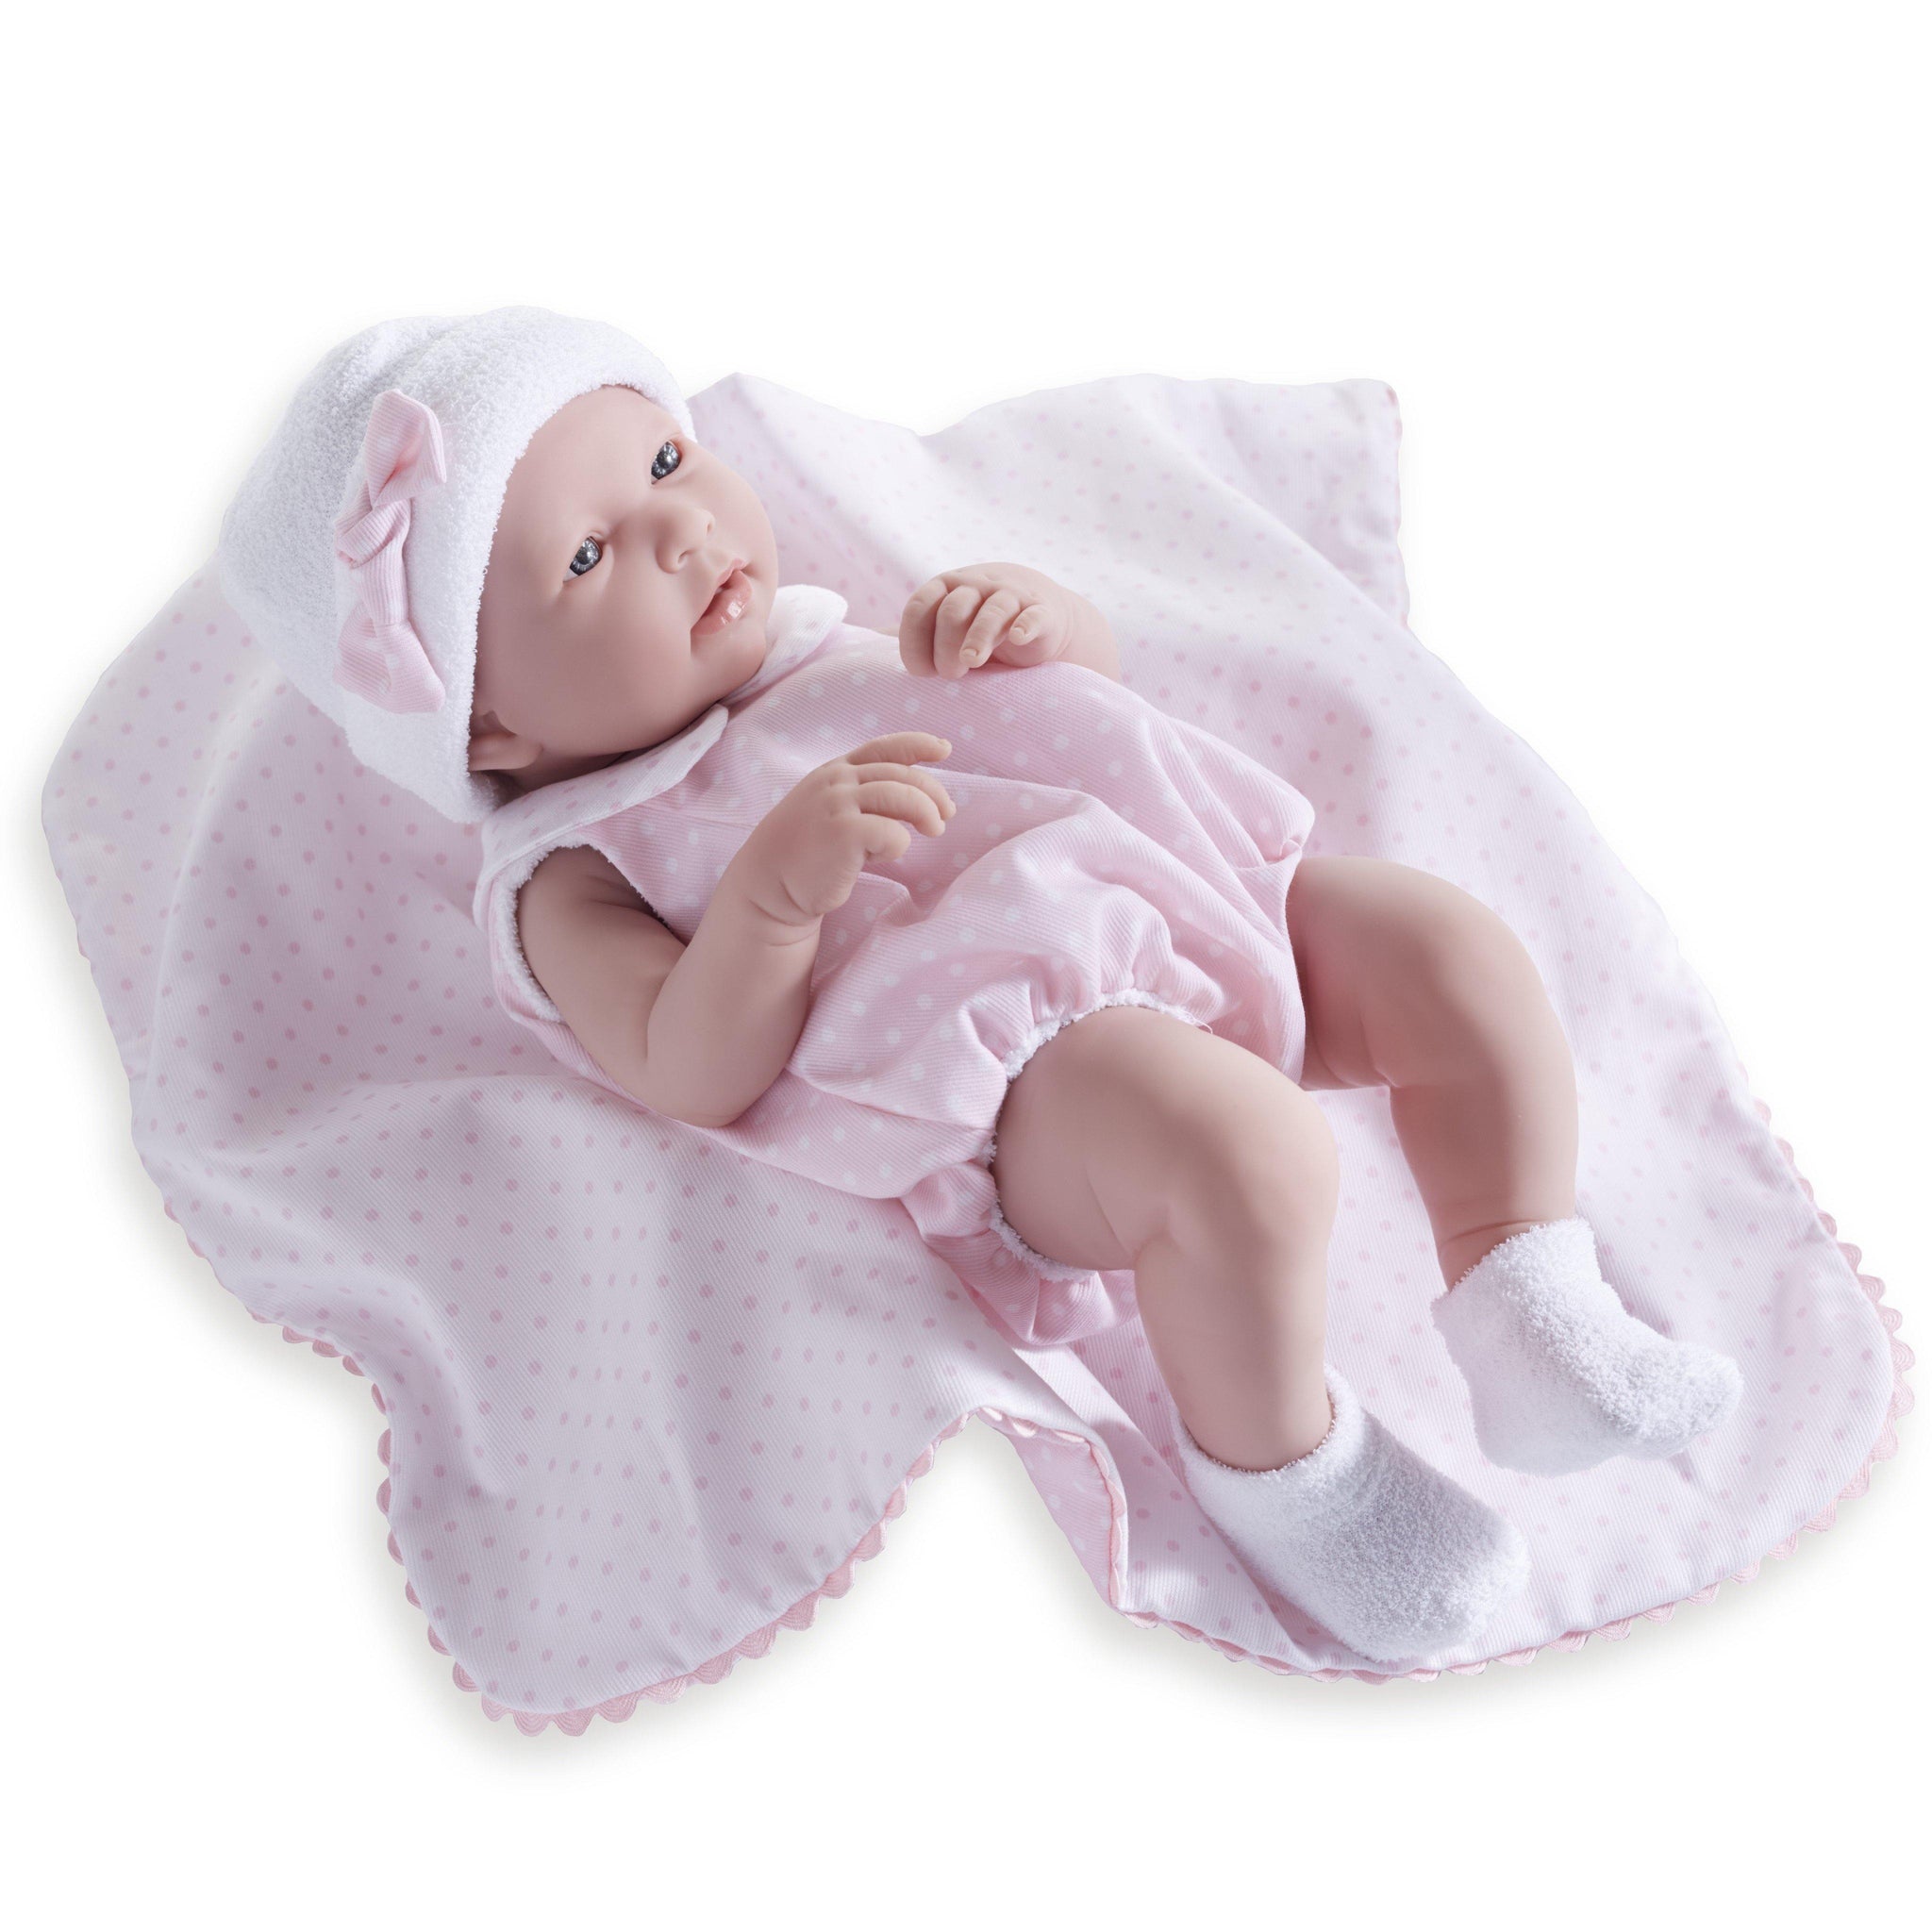 JC Toys,La Newborn All-Vinyl 17in Real Girl Baby Doll-Pink Bubble Suit & Blanket - JC Toys Group Inc.